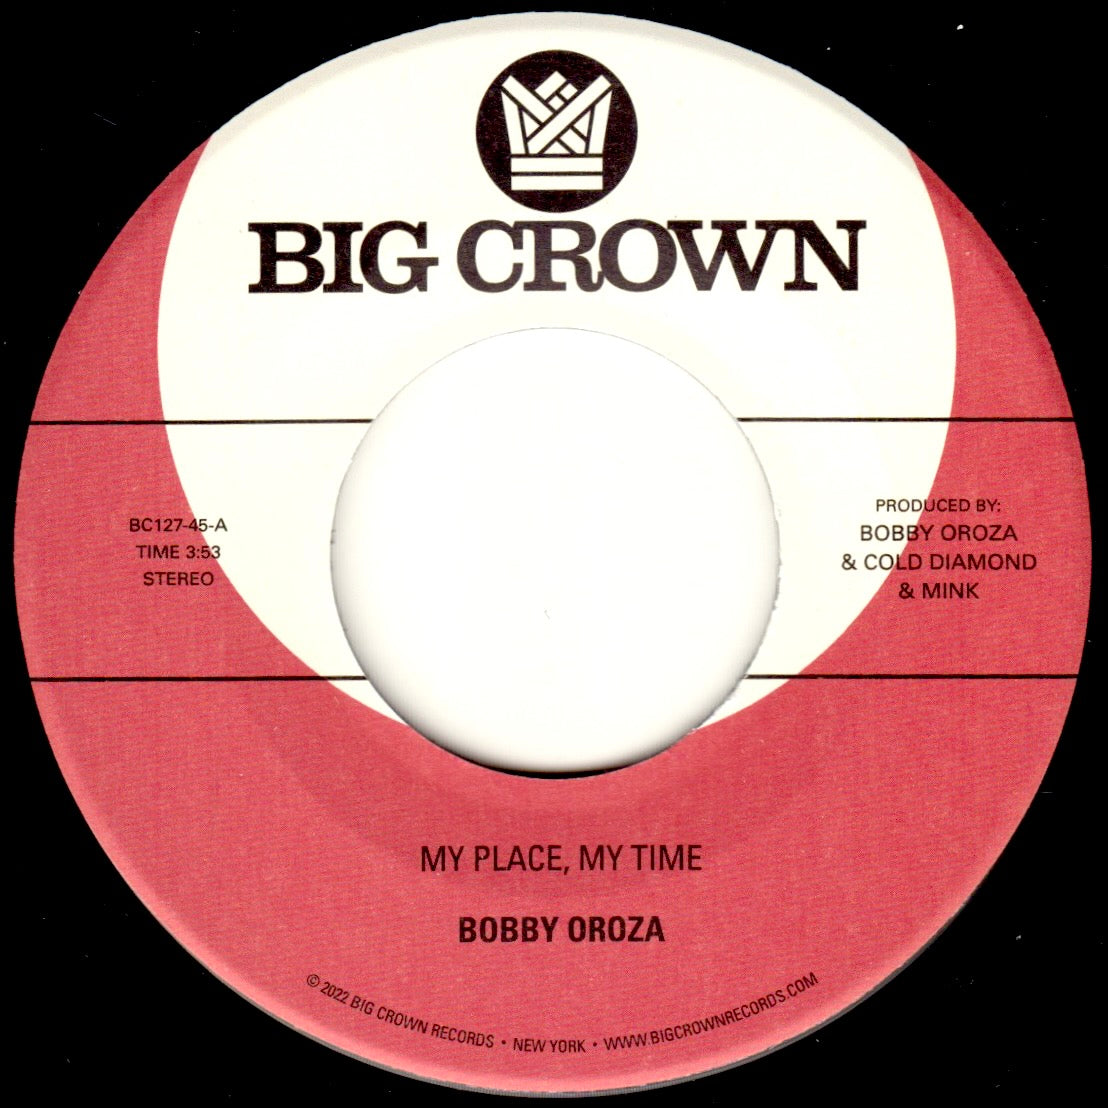 BOBBY OROZA - MY PLACE, MY TIME / THROUGH THESE TEARS Vinyl 7”